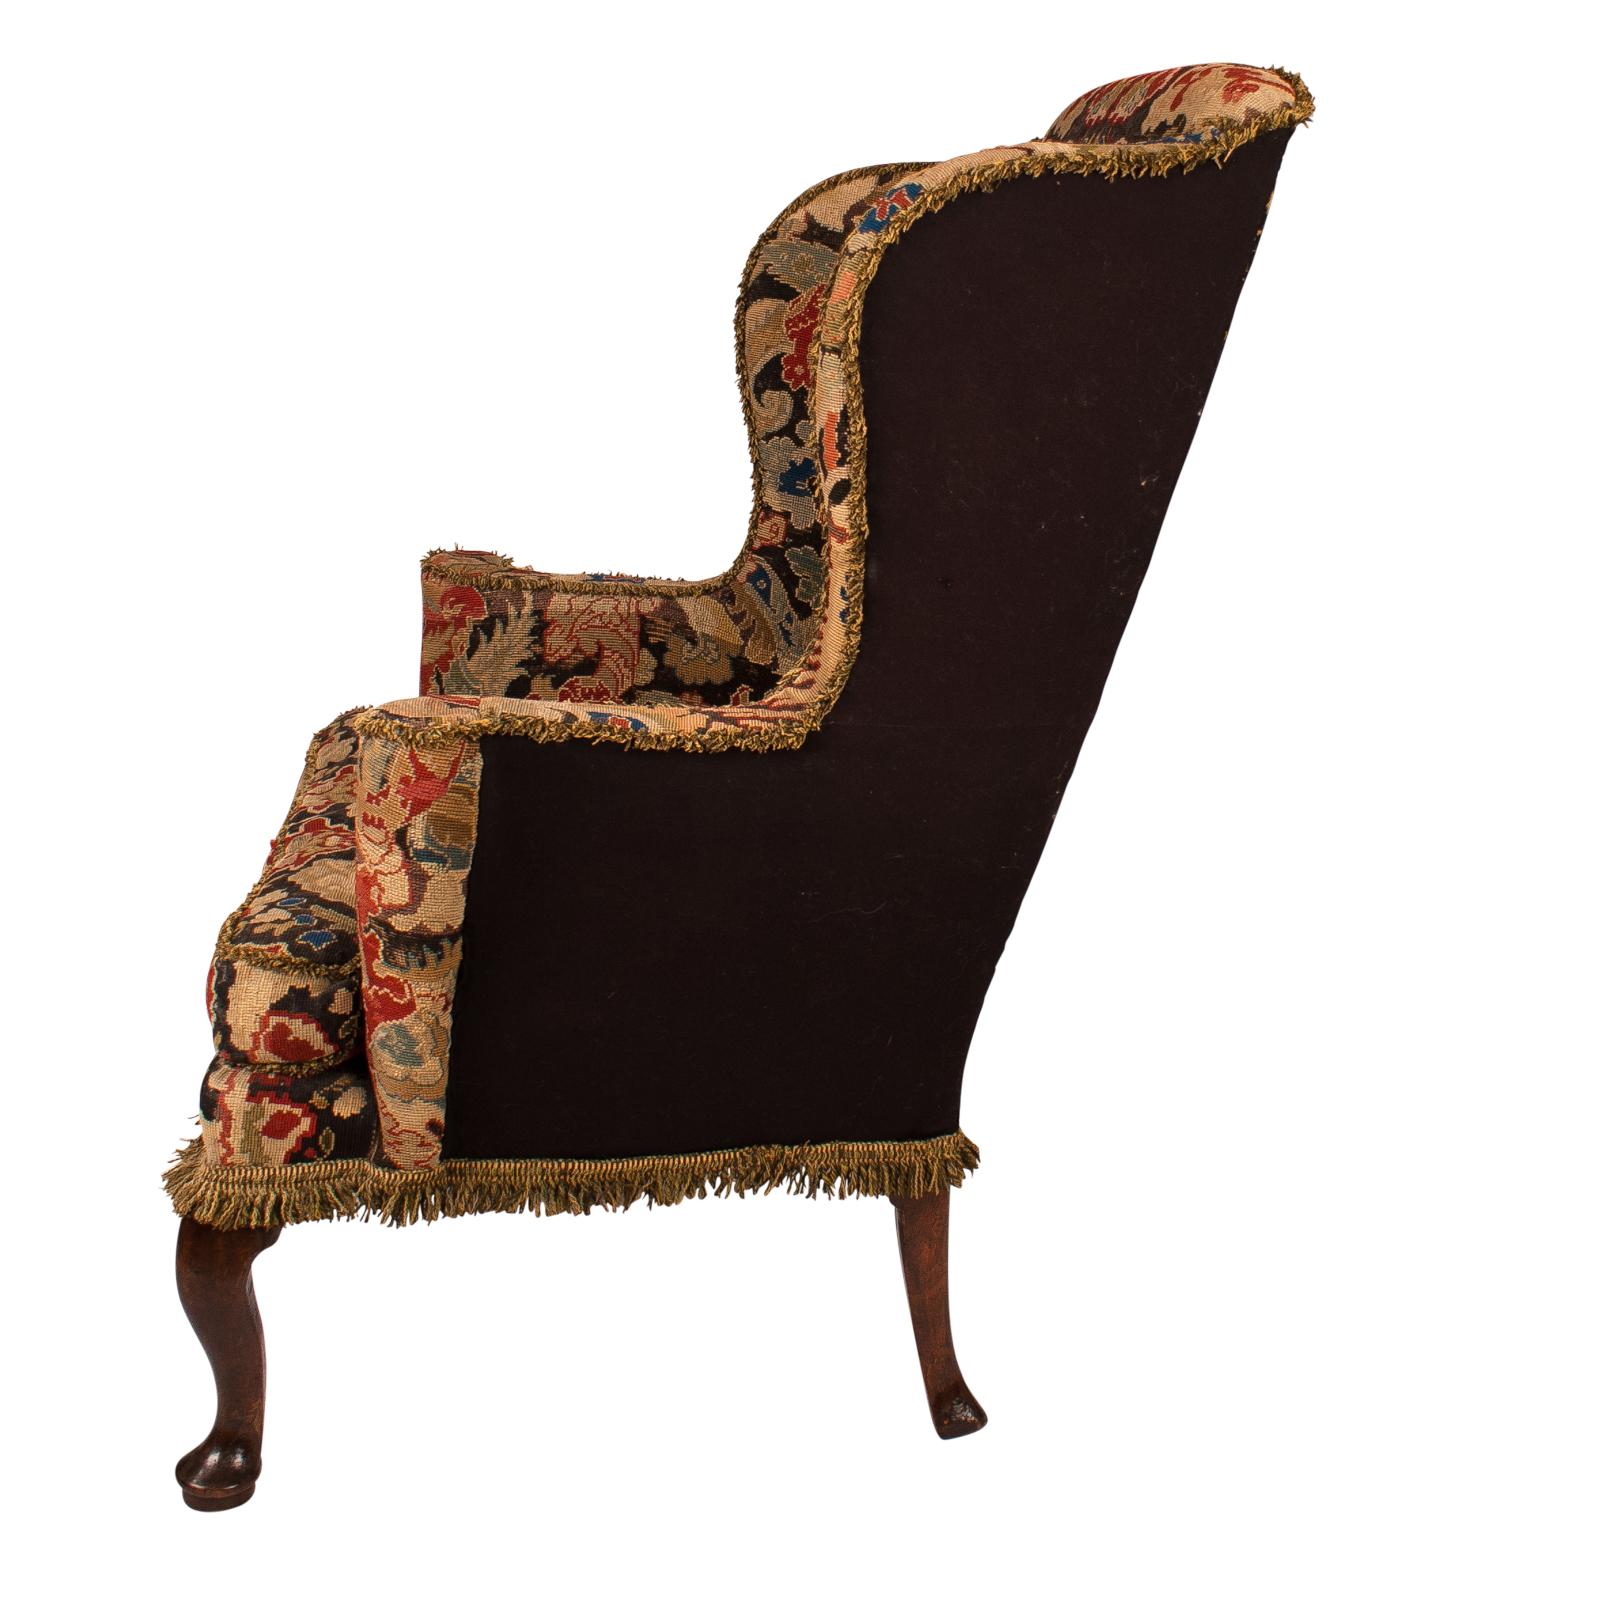 George II Wing Chair, England, circa 1750 (Englisch)